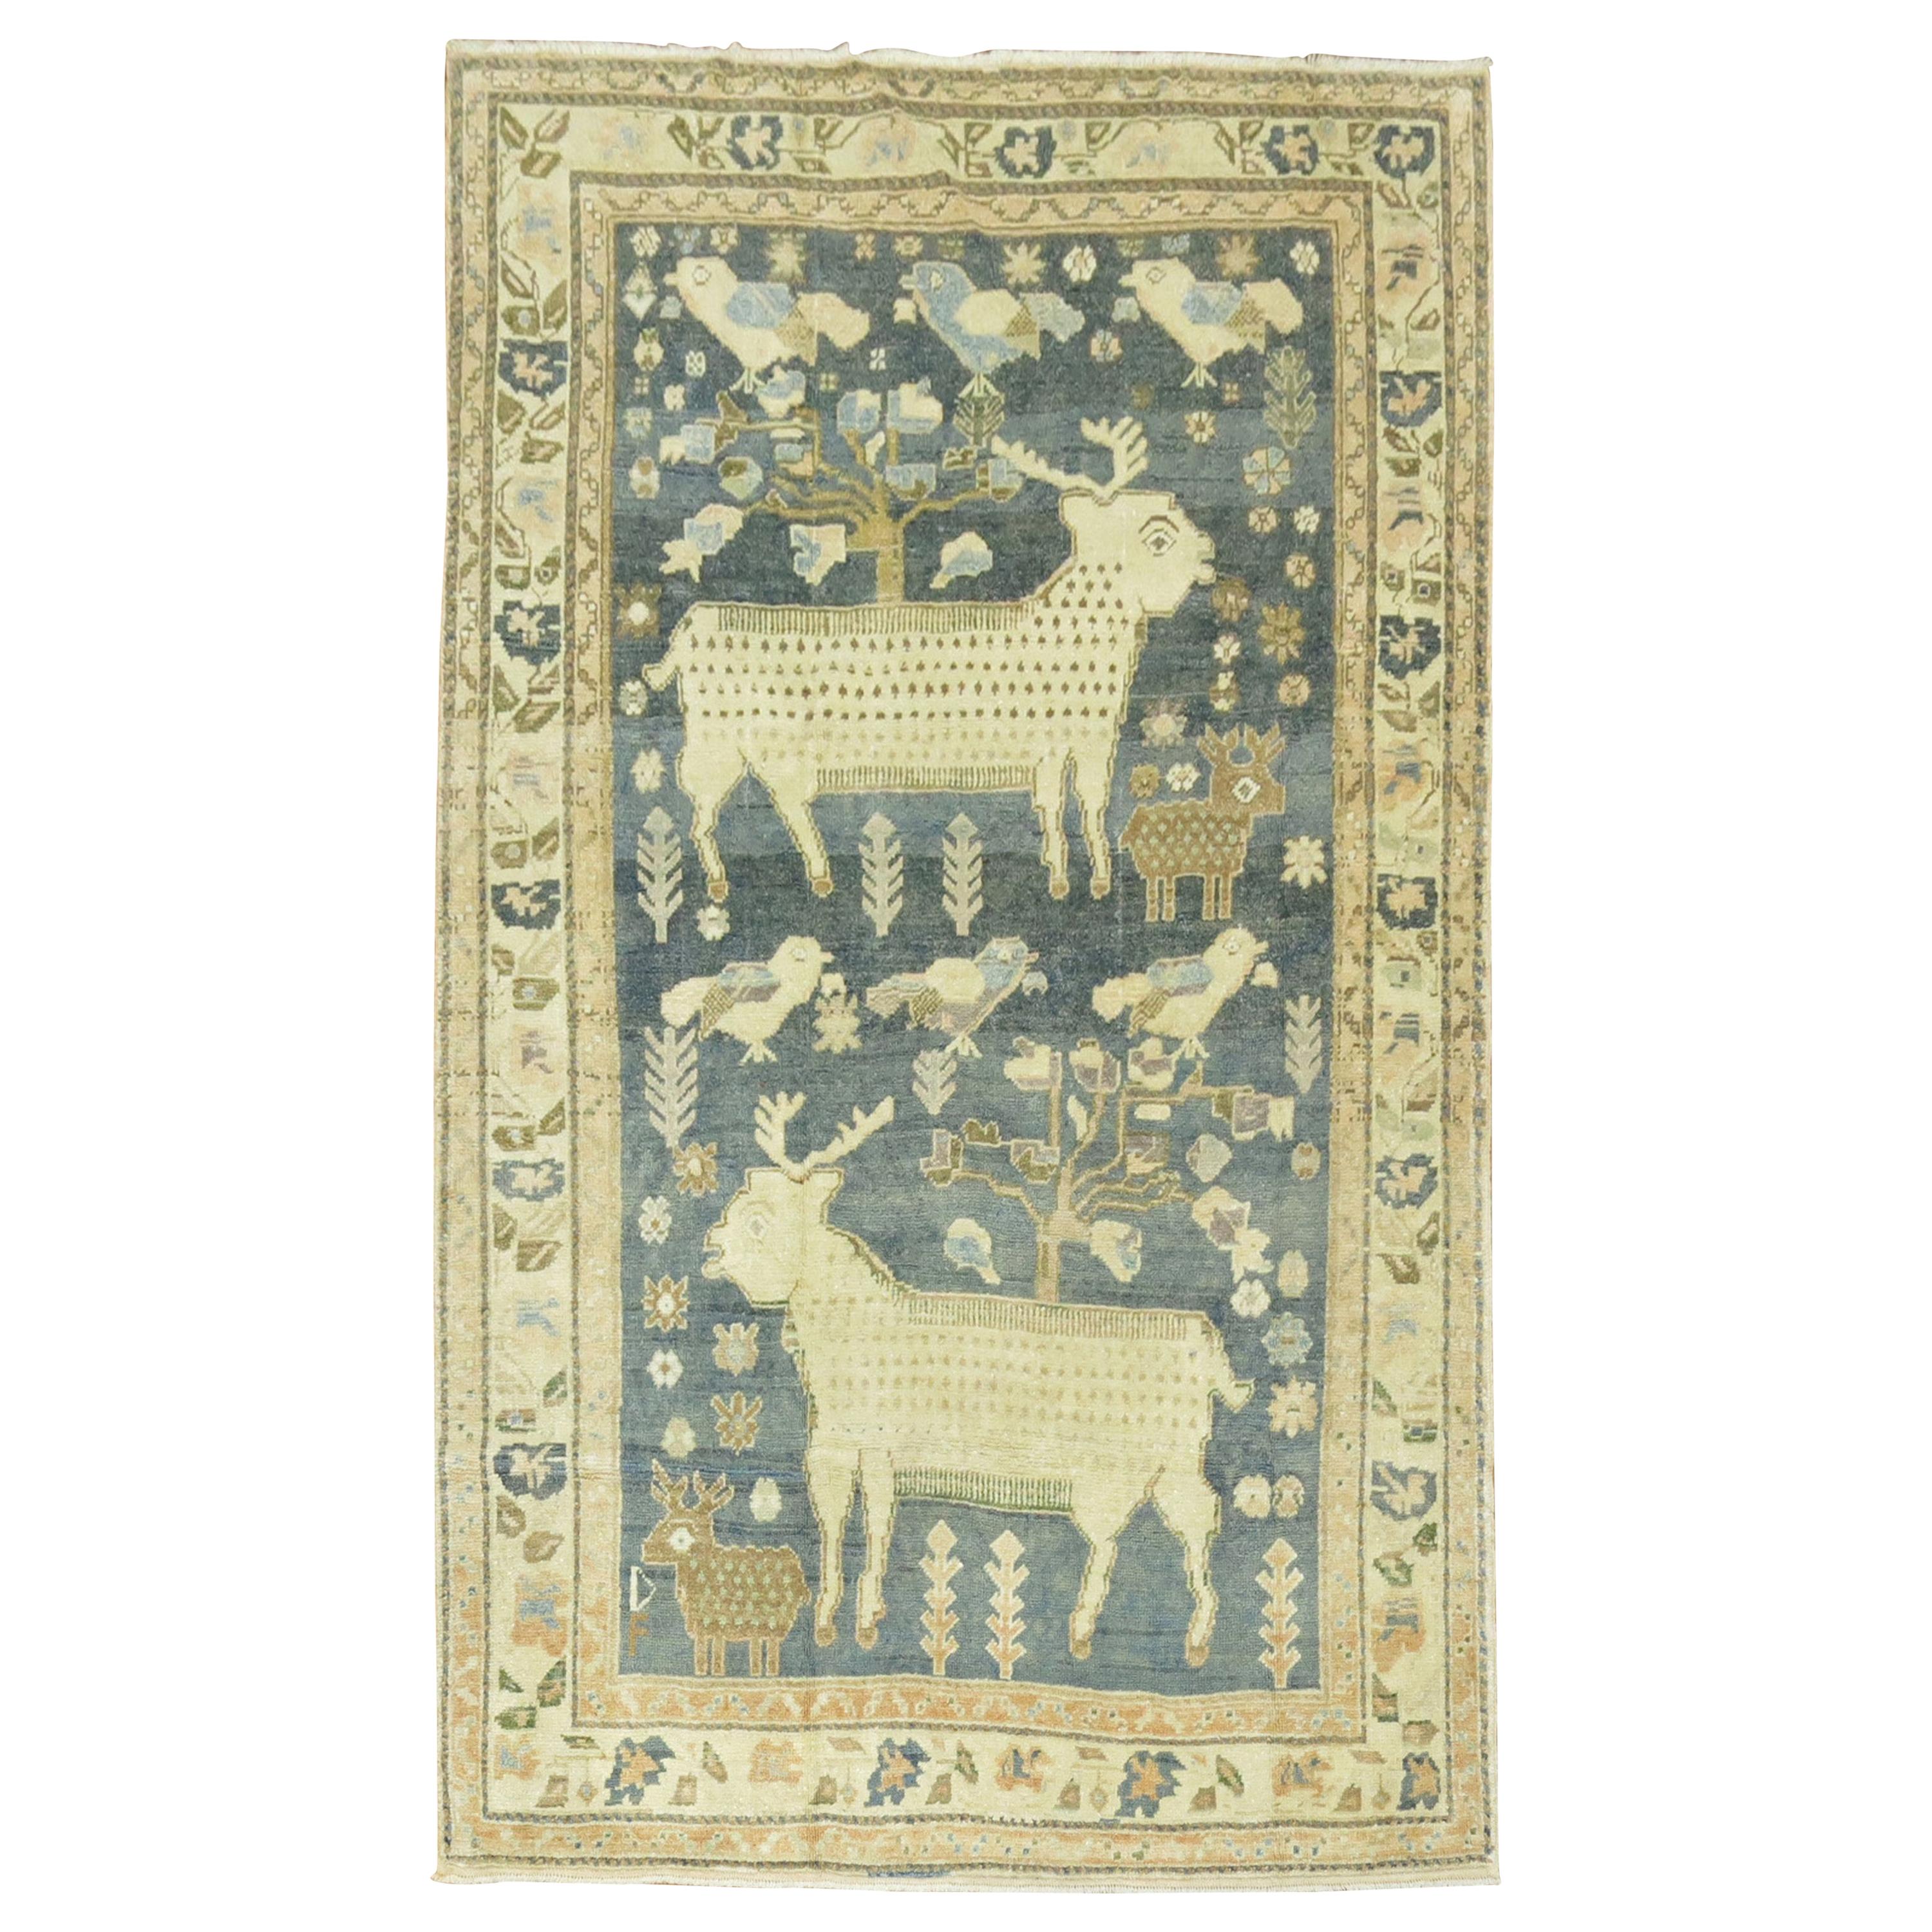 Pictorial Sheep Pigeon Sea Foam Turkish Anatolian Accent Size Decorative Rug For Sale